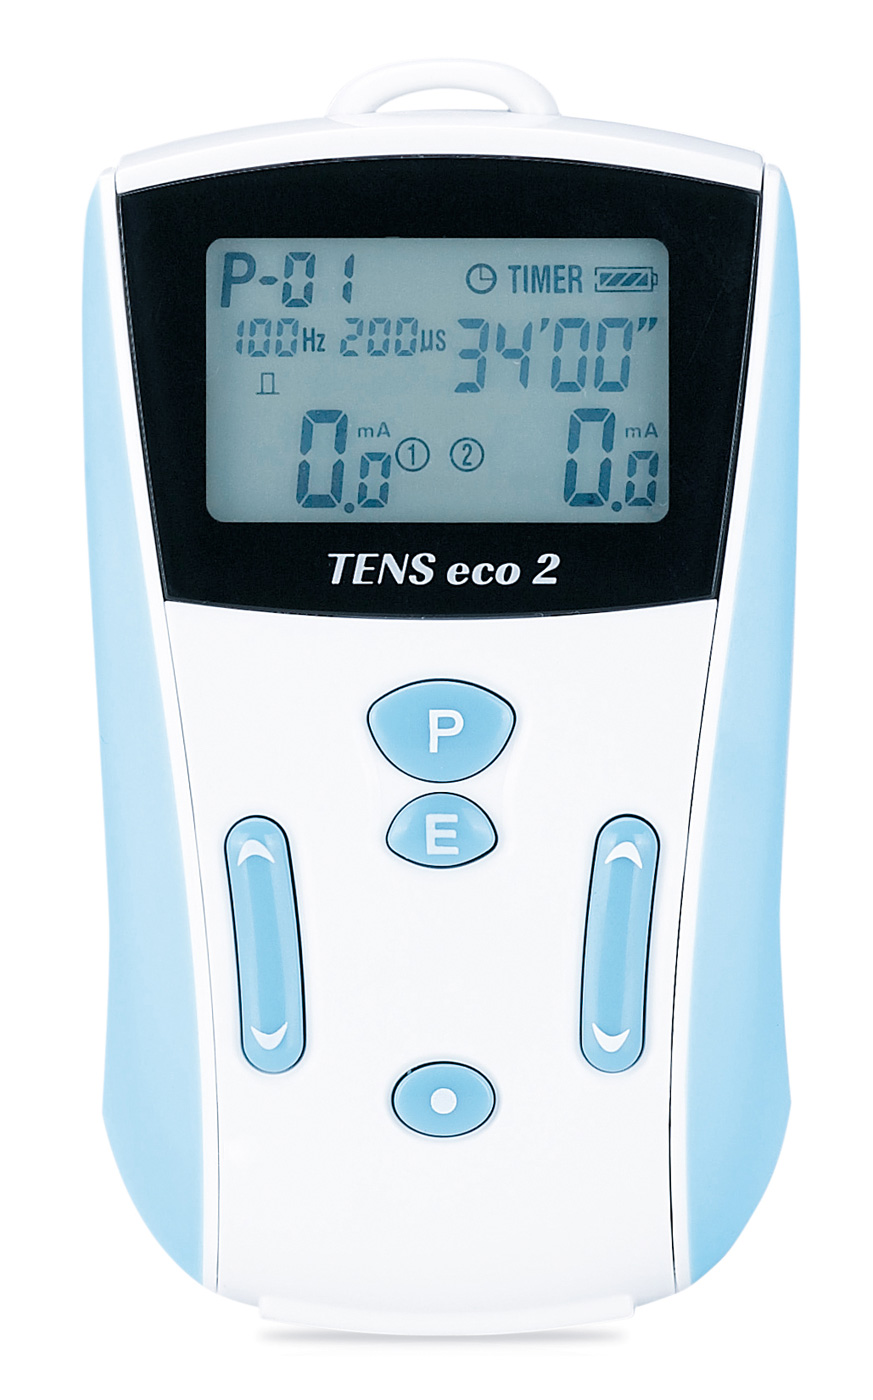 TENS eco 2 - Pain Management in High-Class Design